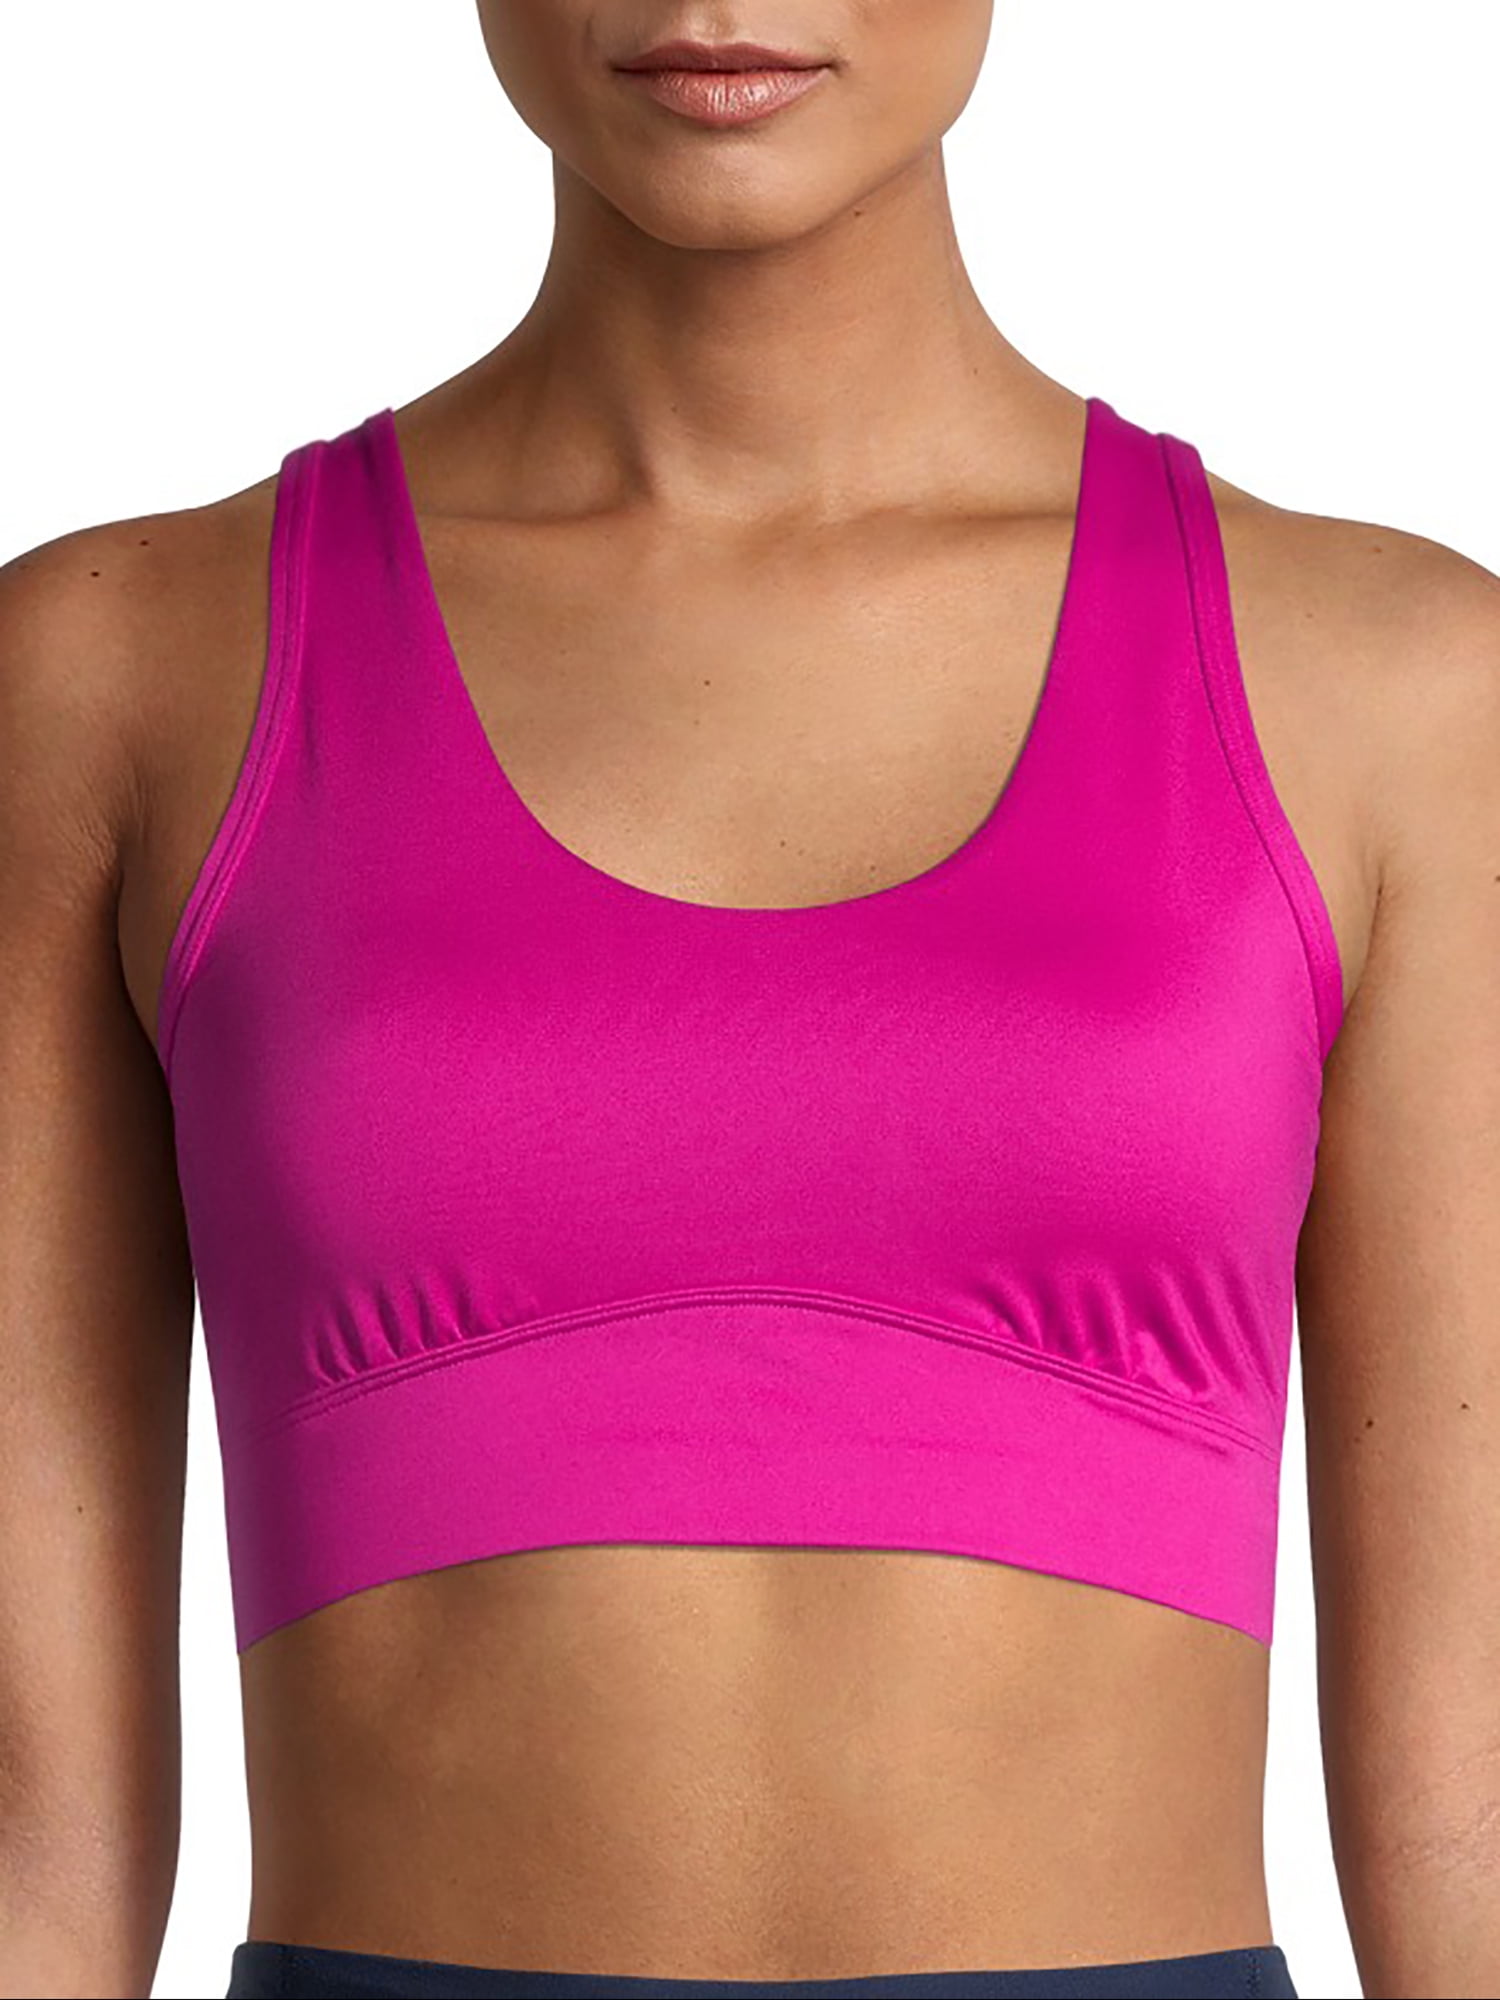 New Hanes Women's Cozy Seamless Wire-Free Bra Style Number G196 in Pink & Purple 